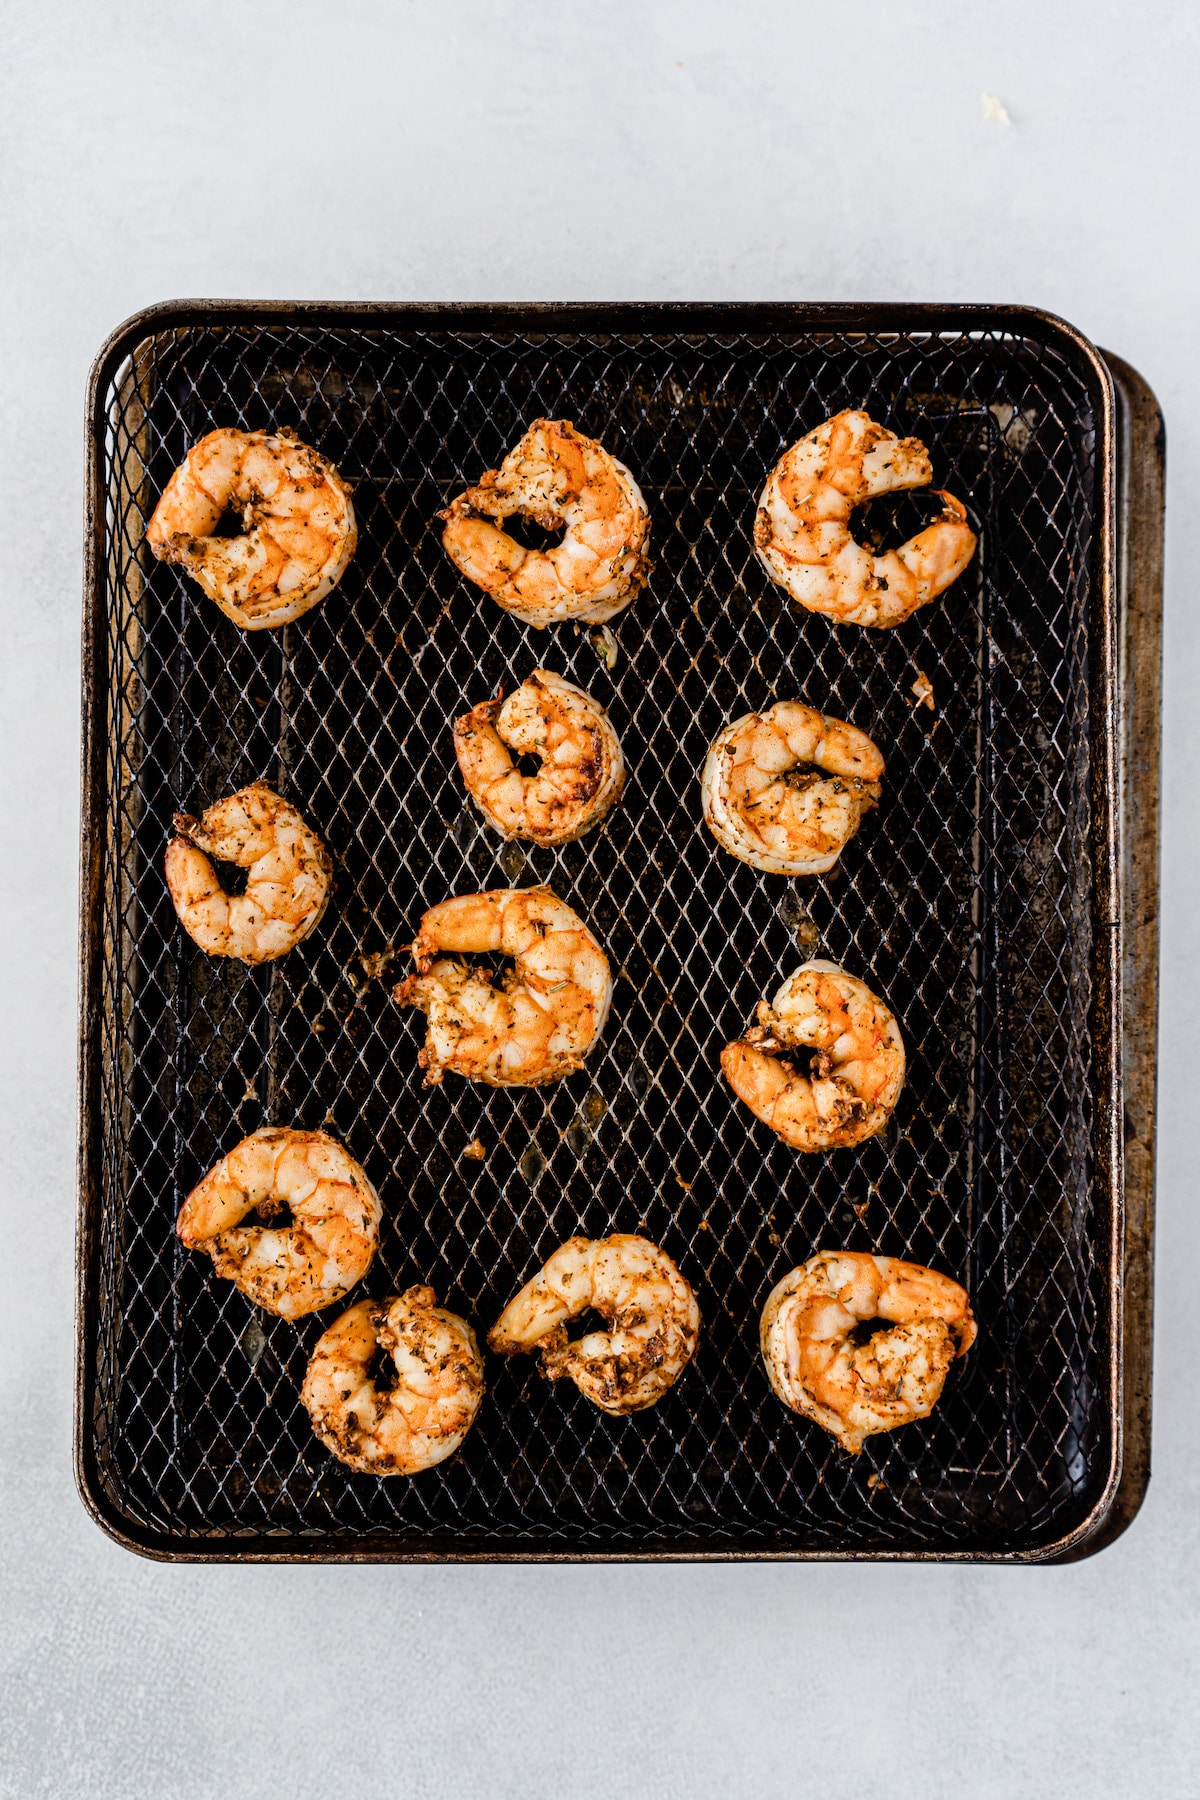 Cooked shrimp on air fryer tray